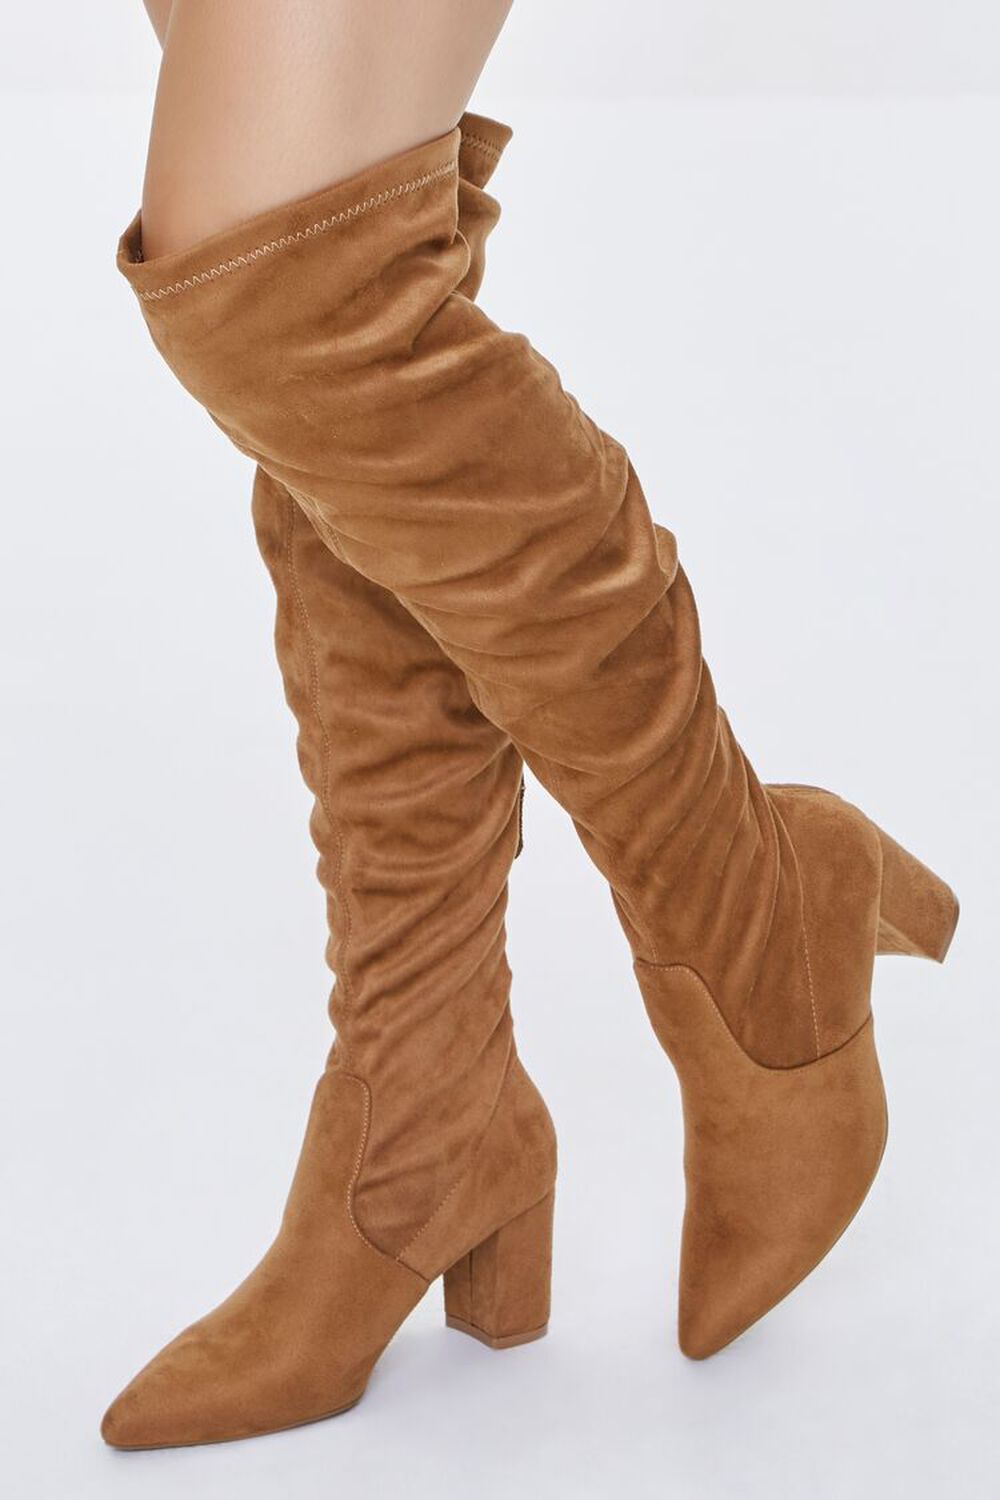 CHESTNUT Faux Suede Over-the-Knee Boots, image 1